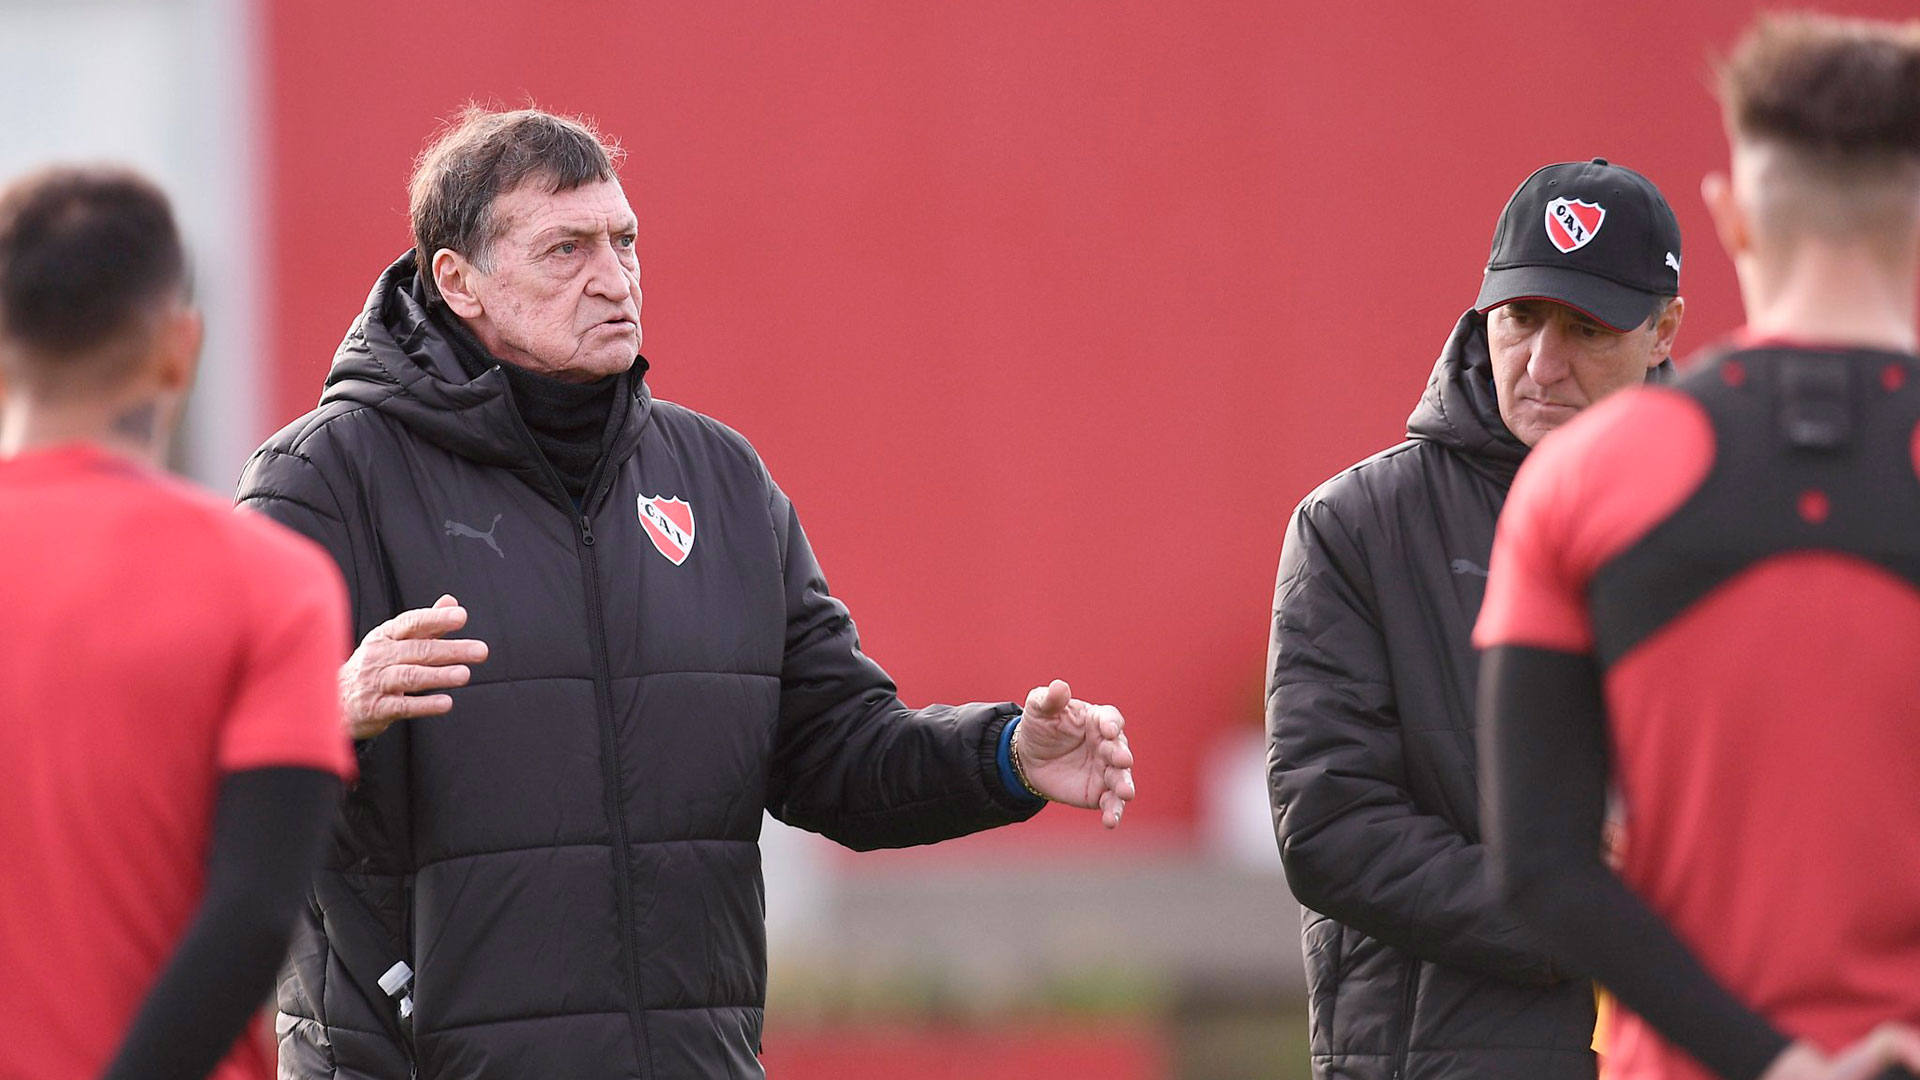 Falcioni started his third cycle as coach of Independiente